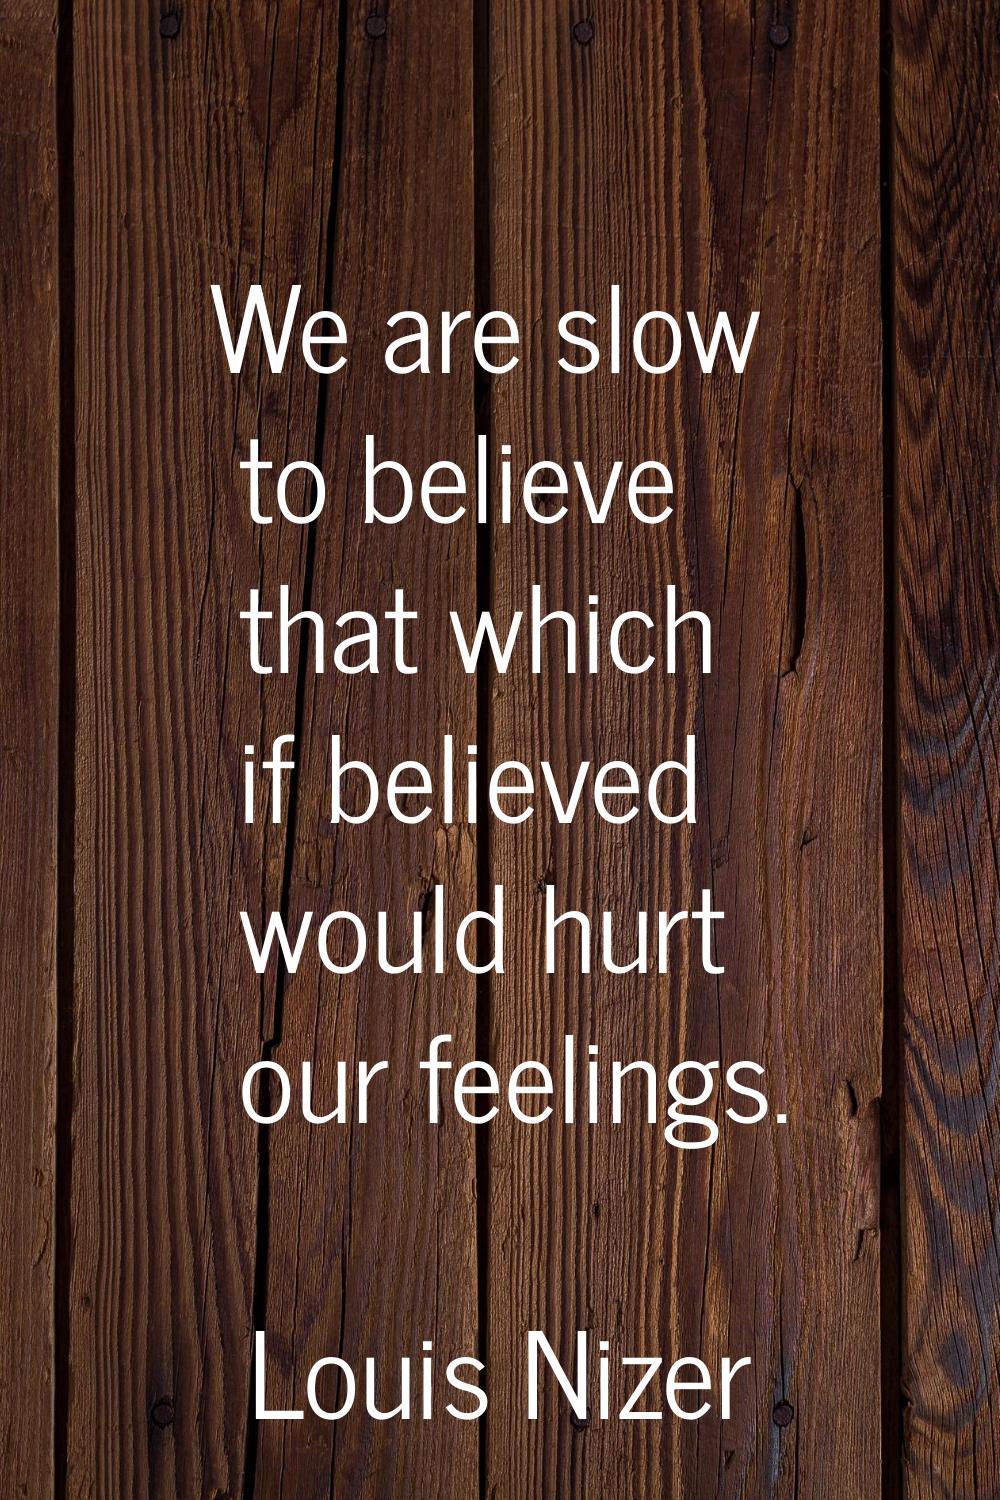 We are slow to believe that which if believed would hurt our feelings.